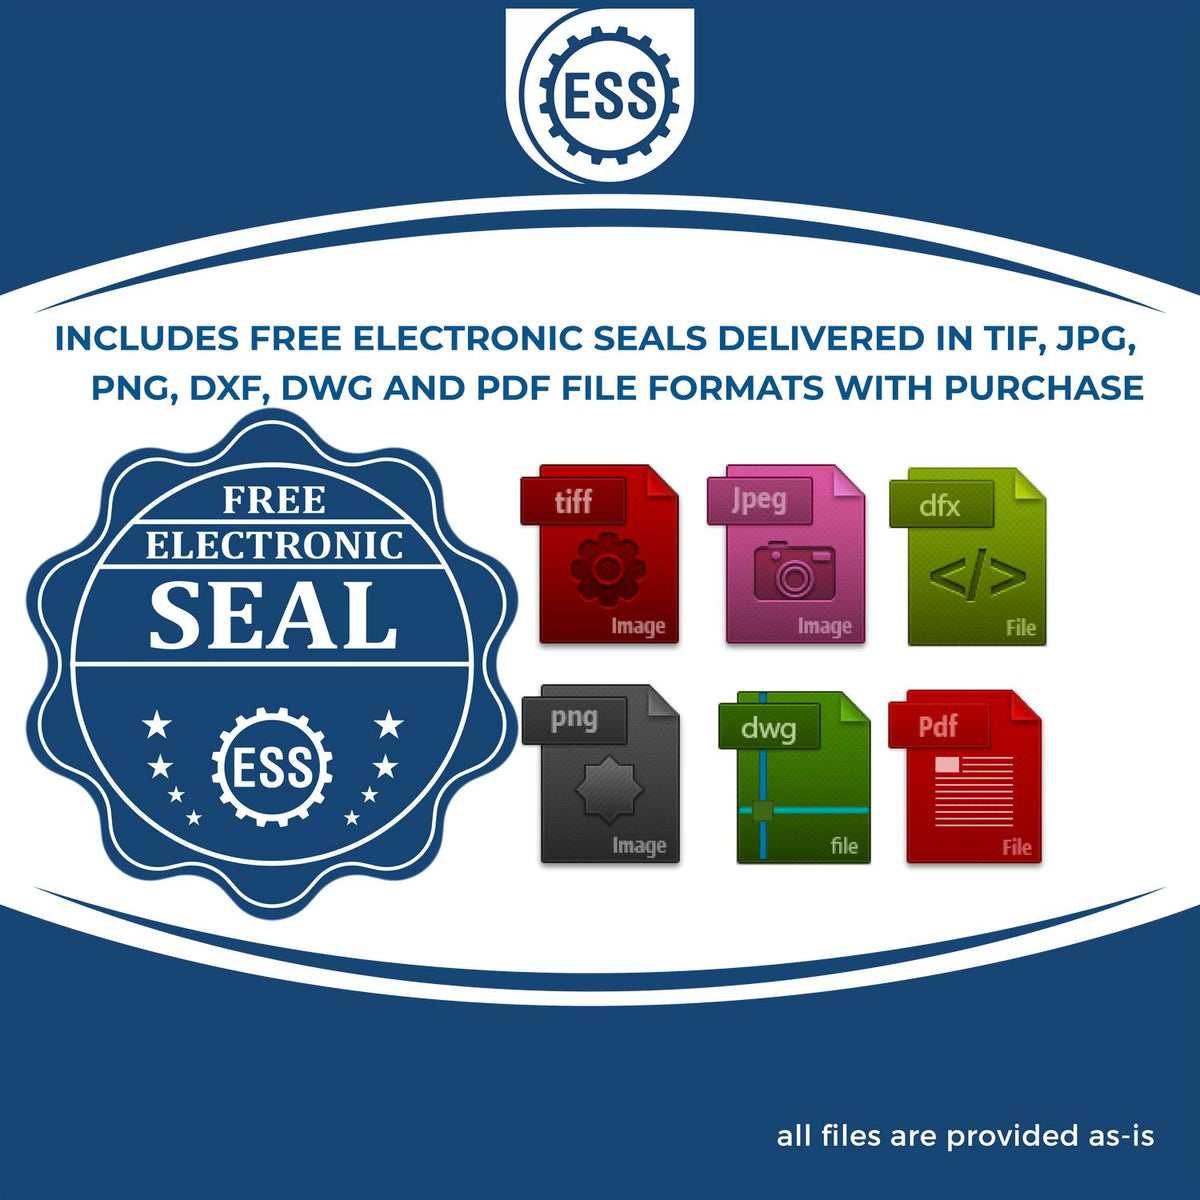 An infographic for the free electronic seal for the Hybrid Alaska Land Surveyor Seal illustrating the different file type icons such as DXF, DWG, TIF, JPG and PNG.